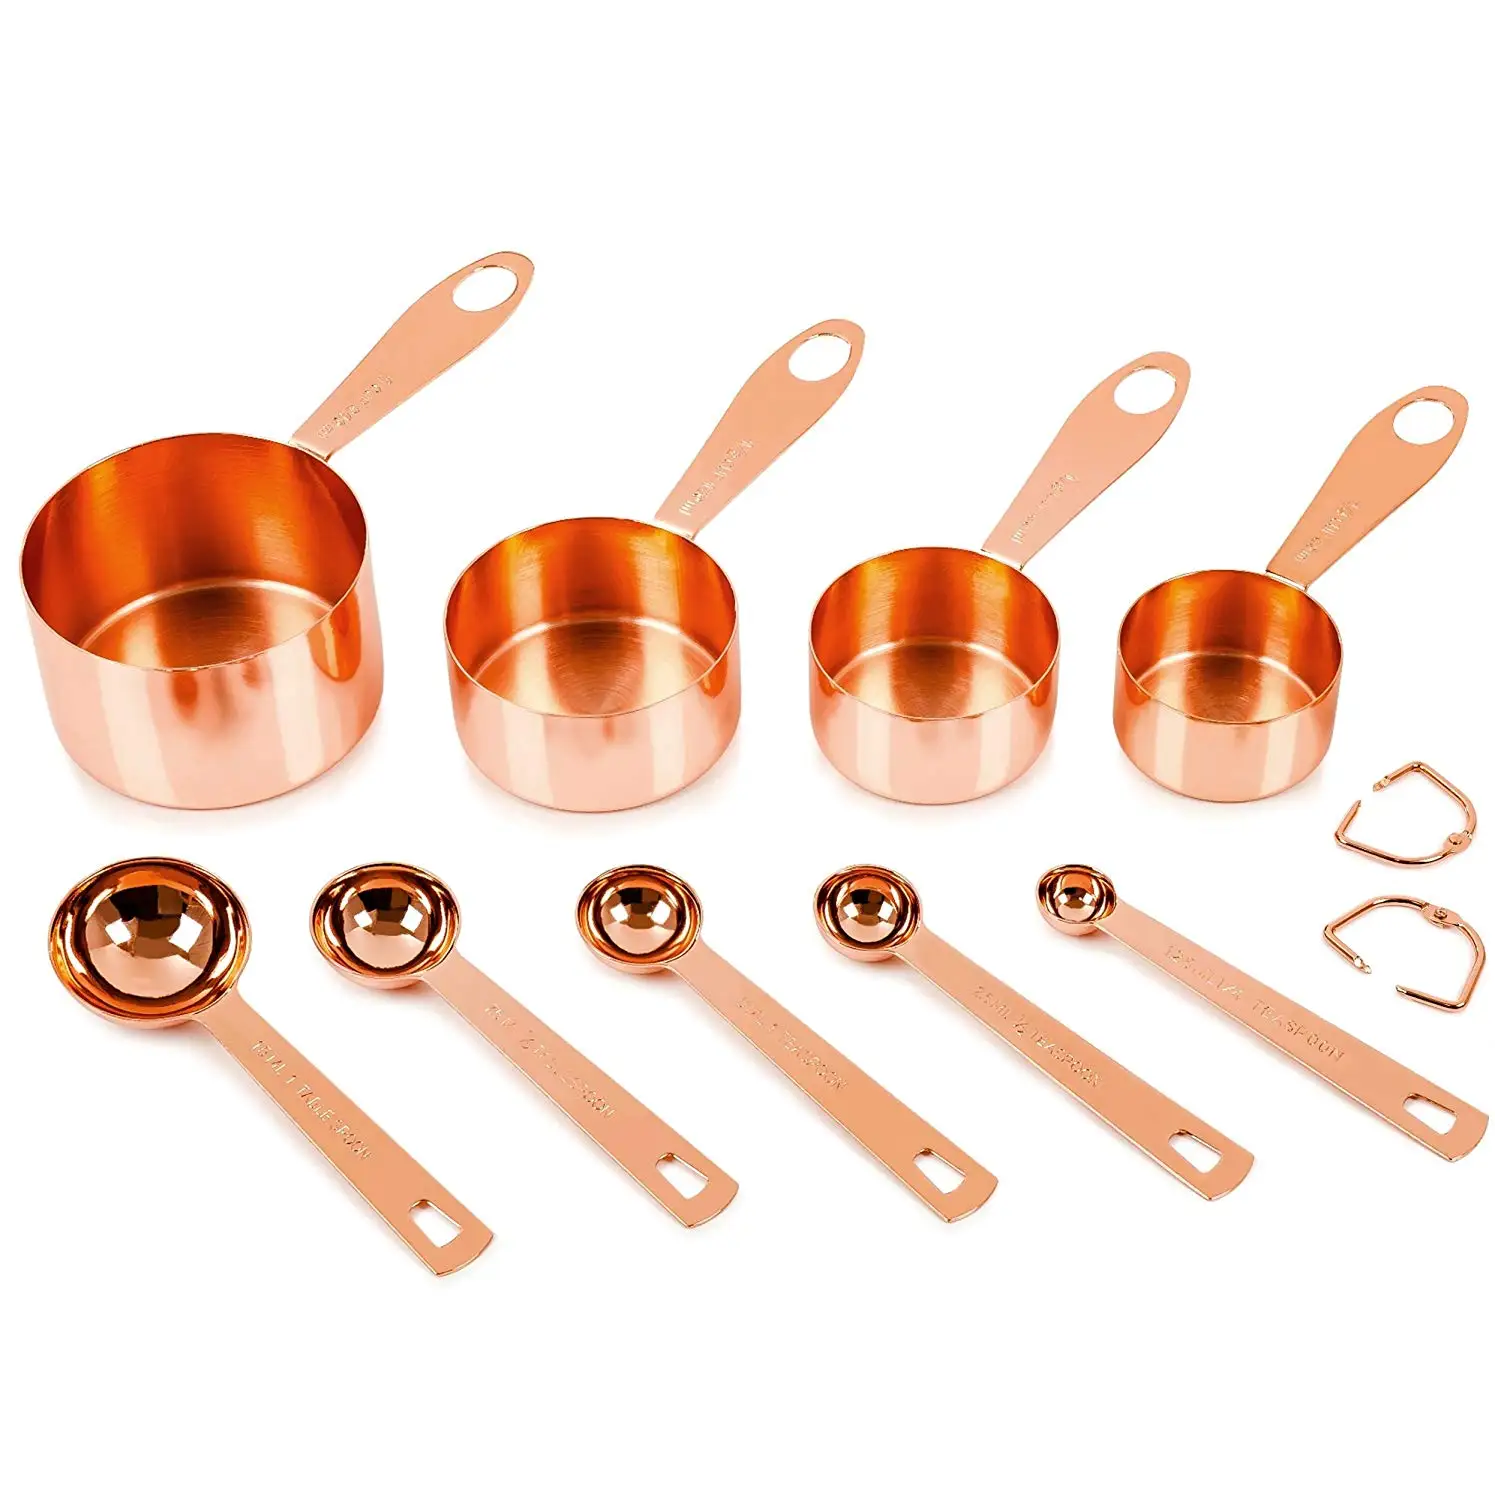 Pack of 9 Bocotoer Copper Stainless Steel Measuring Cups and Spoons 